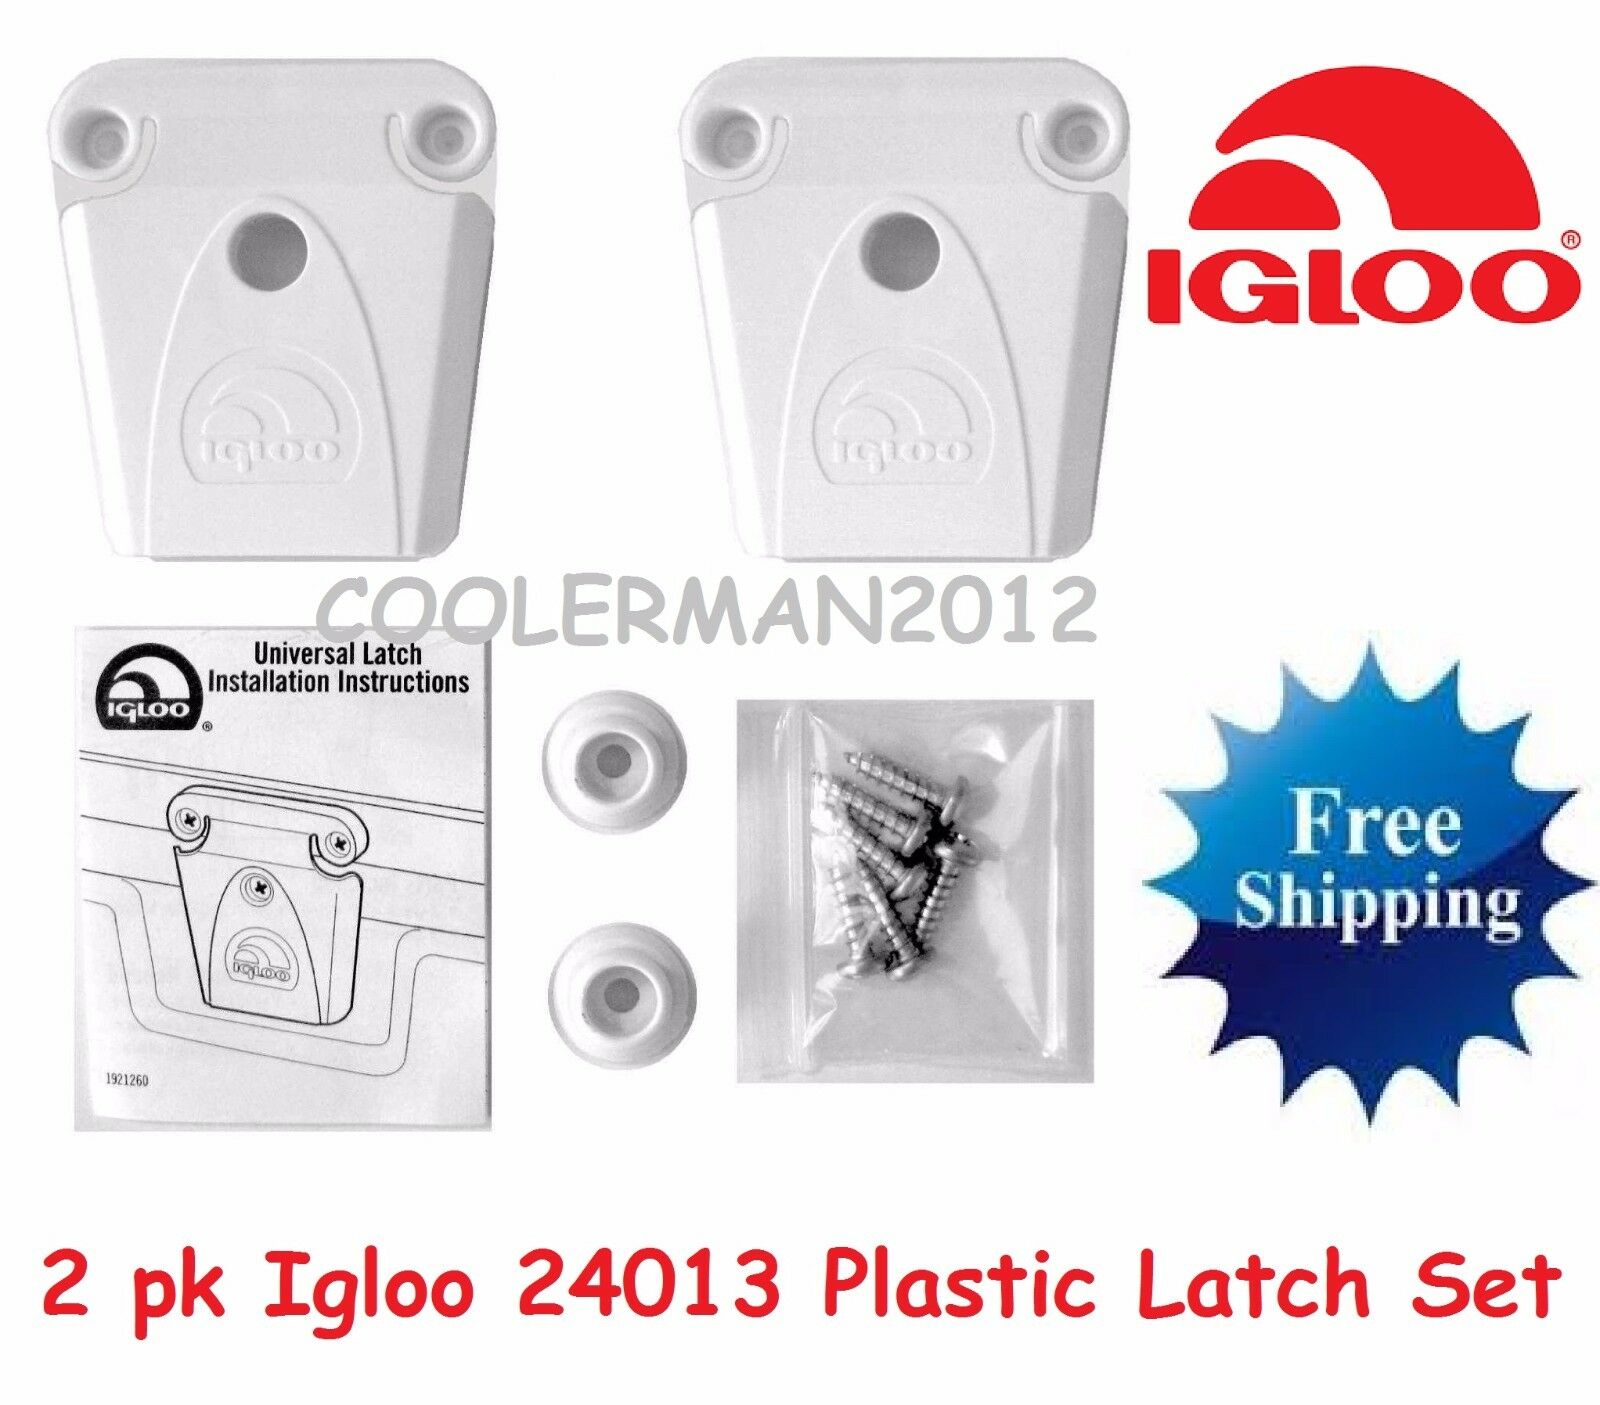 2 New Igloo Cooler Part #24013 - Latch Post And Screws Parts Kit Plastic